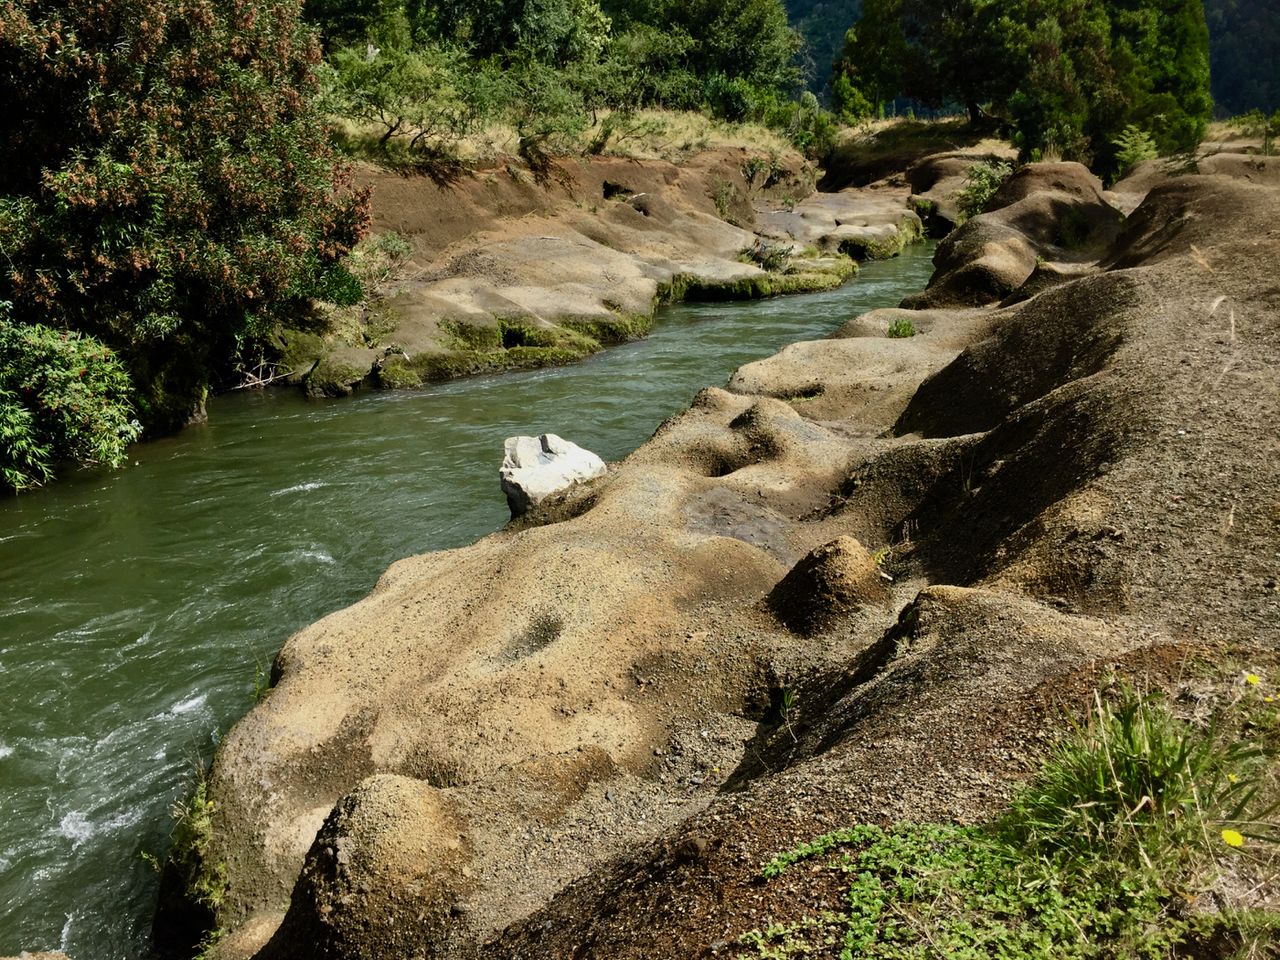 River with well-worn rock banks.